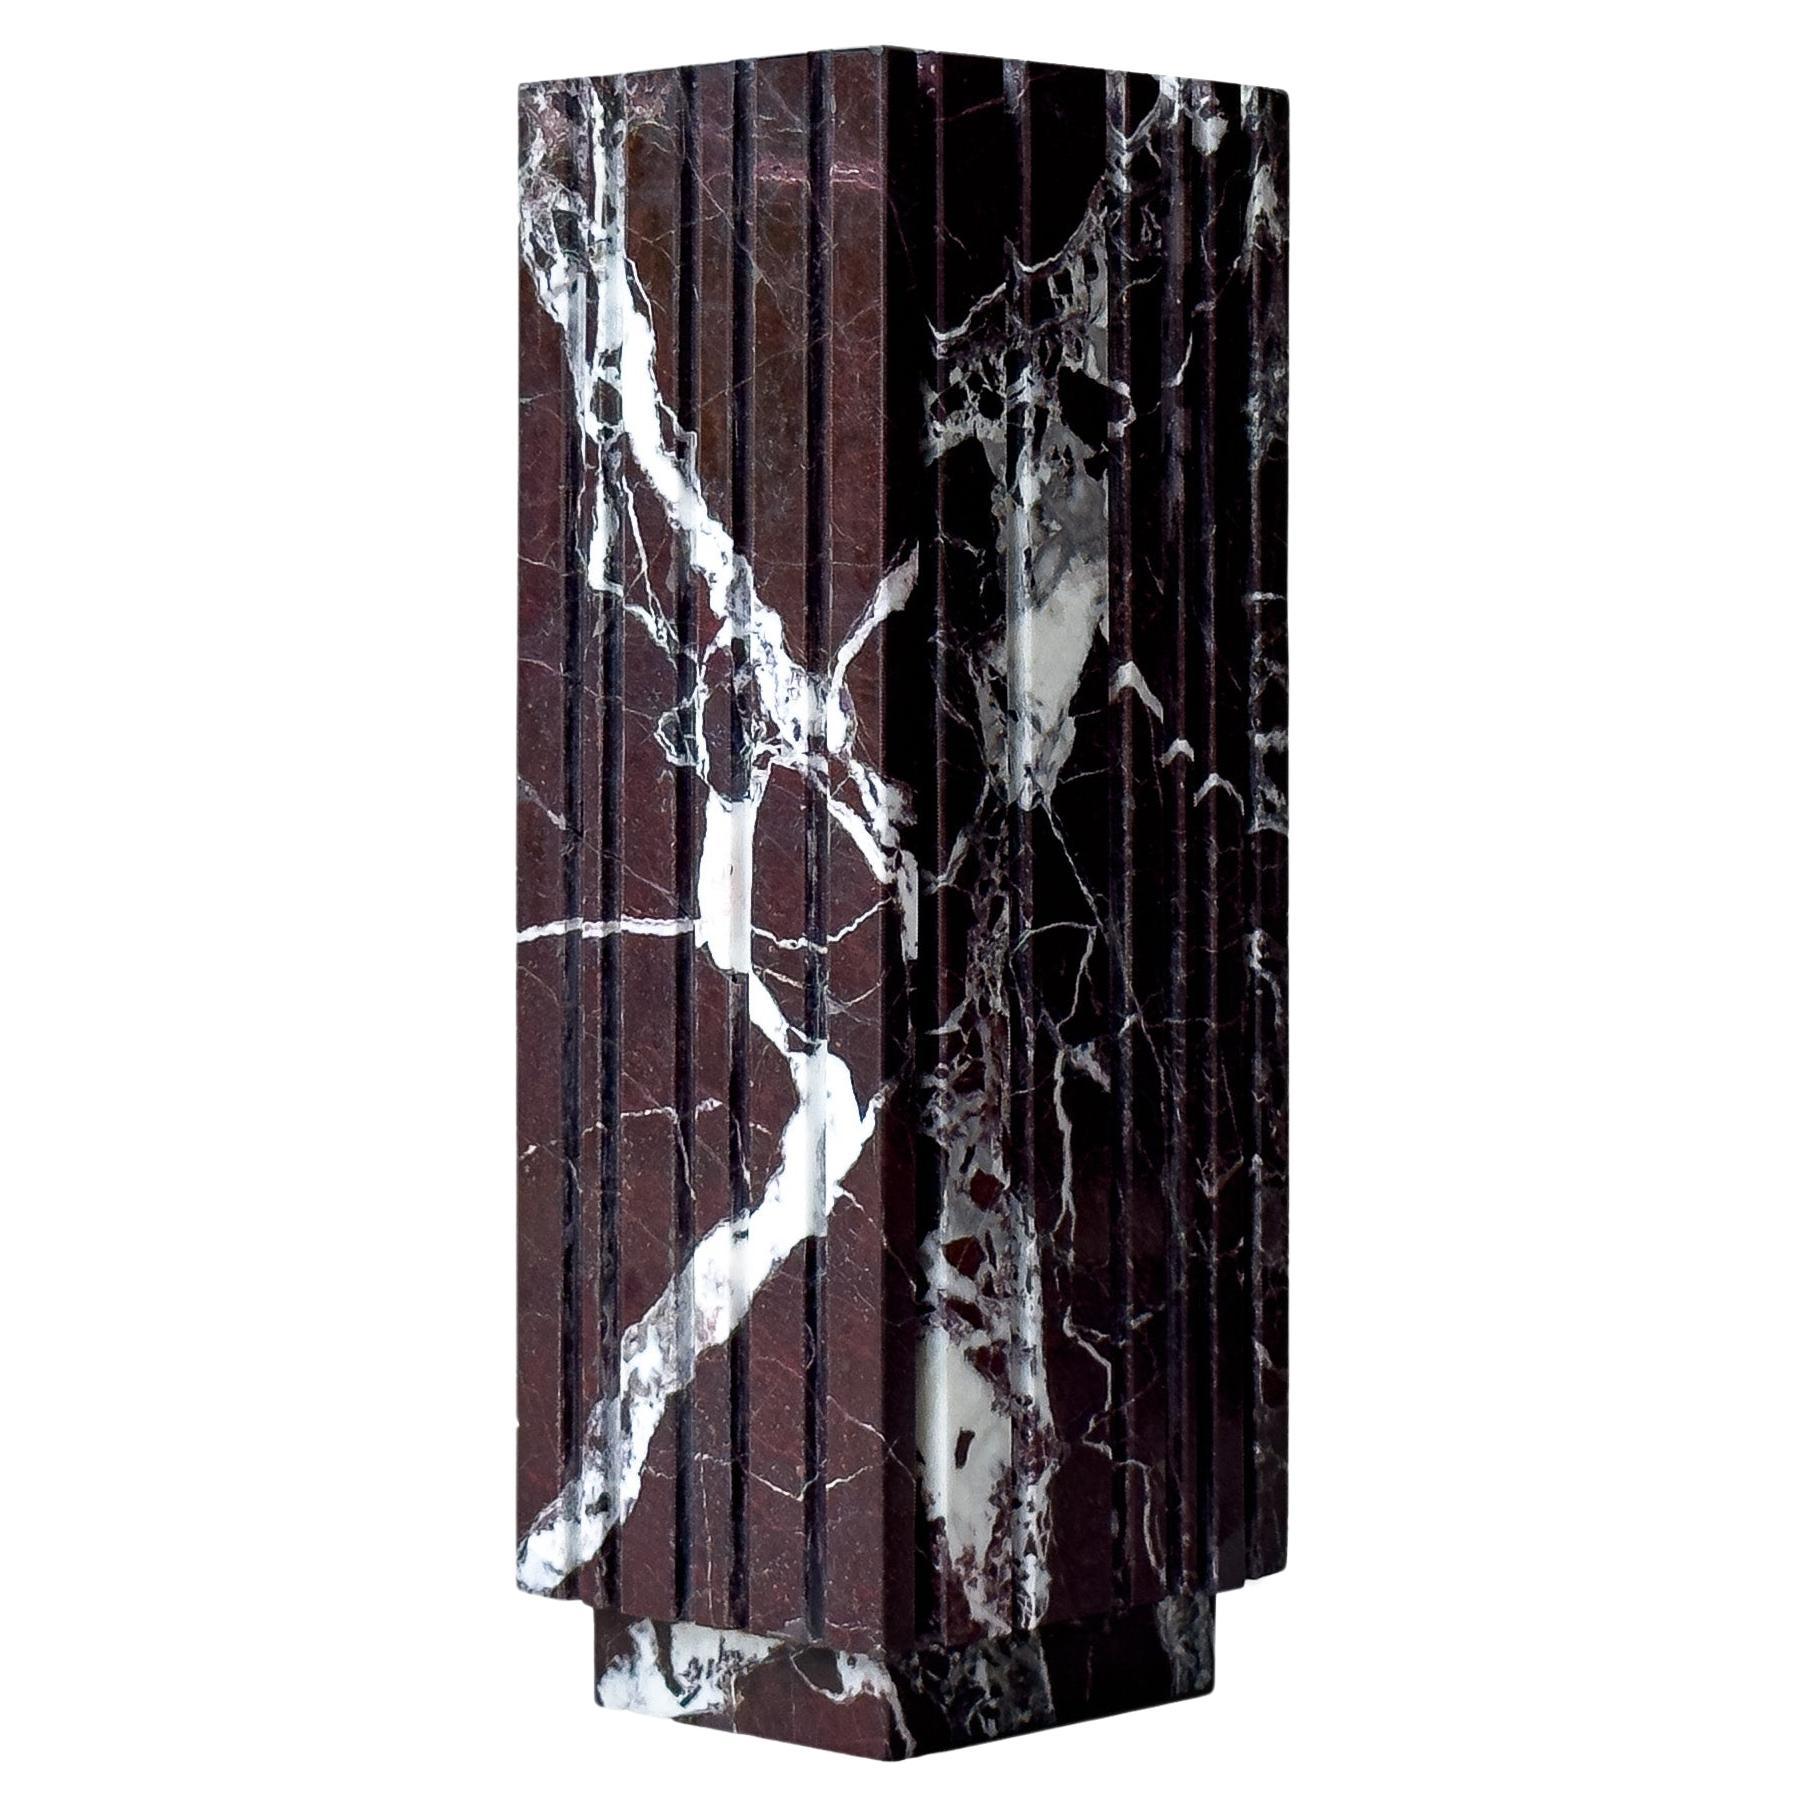 ROSSO GROOVY Vase in Rosso Levanto Marble by Meble Matters 8" For Sale